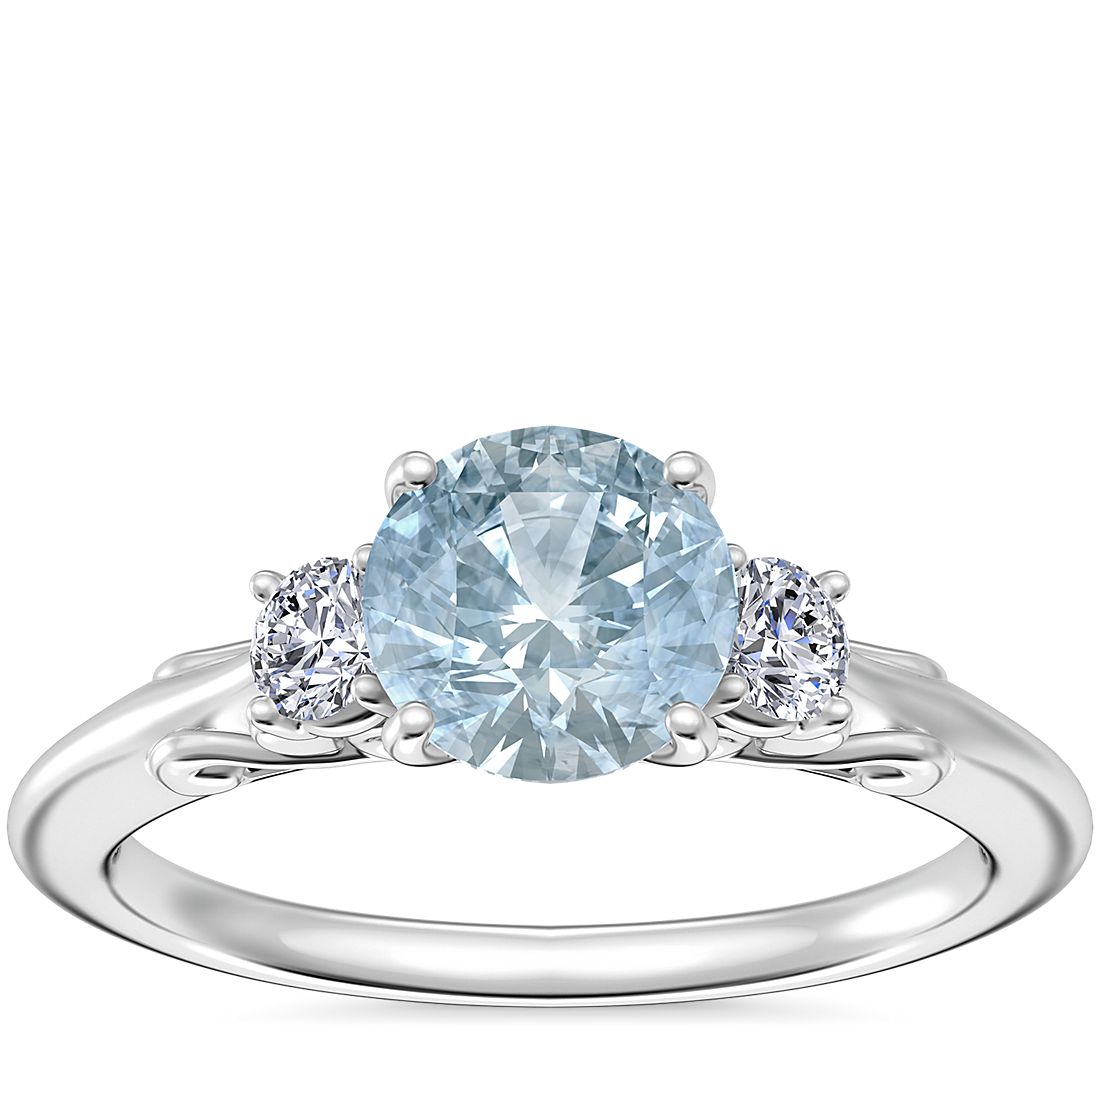 Vintage Three Stone Engagement Ring with Round Aquamarine in 18k White Gold (6.5mm)